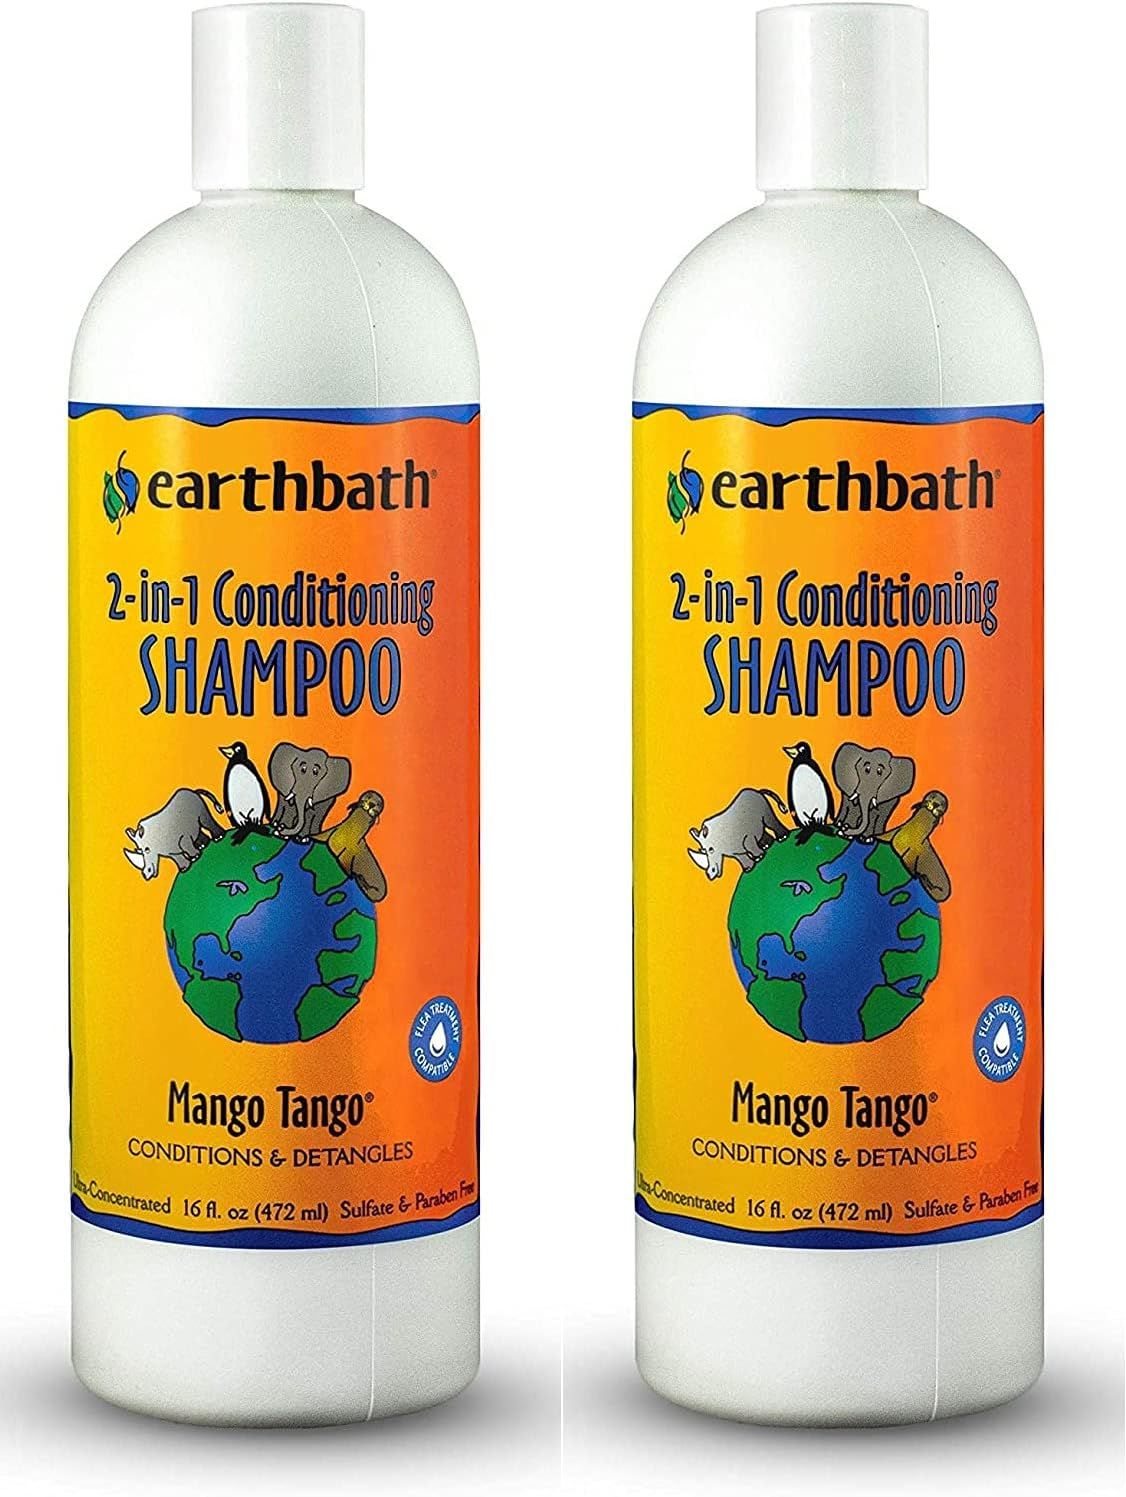 Top 5 Best Cat Shampoos and Conditioners for Your Pet